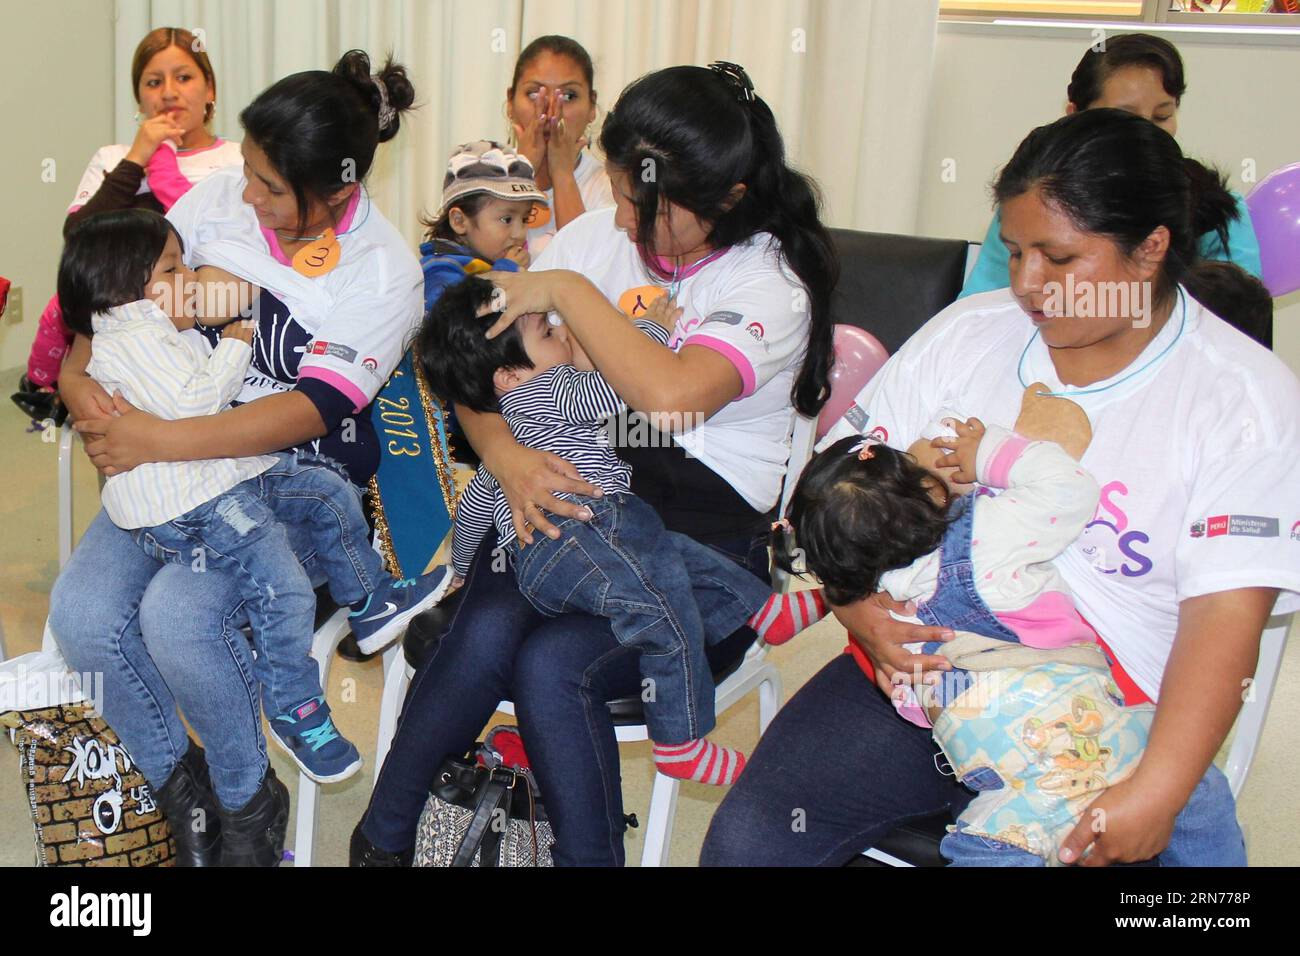 (150821) -- LIMA, Aug. 21, 2015 -- Mothers breastfeed their children during the contest Baby Mamoncito in the frame of the Week of Breastfeeding of Peru 2015, in Lima city, Peru, on Aug. 21, 2015. The Week of Breastfeeding of Peru takes place on the fourth week in August every year in order to promote breastfeeding, according to local press information.Luis Camacho) (lc) (jg) PERU-LIMA-SOCIETY-BREASTFEEDING WEEK e LuisxCamacho PUBLICATIONxNOTxINxCHN   150821 Lima Aug 21 2015 Mothers breastfeed their Children during The Contest Baby  in The Frame of The Week of Breastfeeding of Peru 2015 in Lim Stock Photo